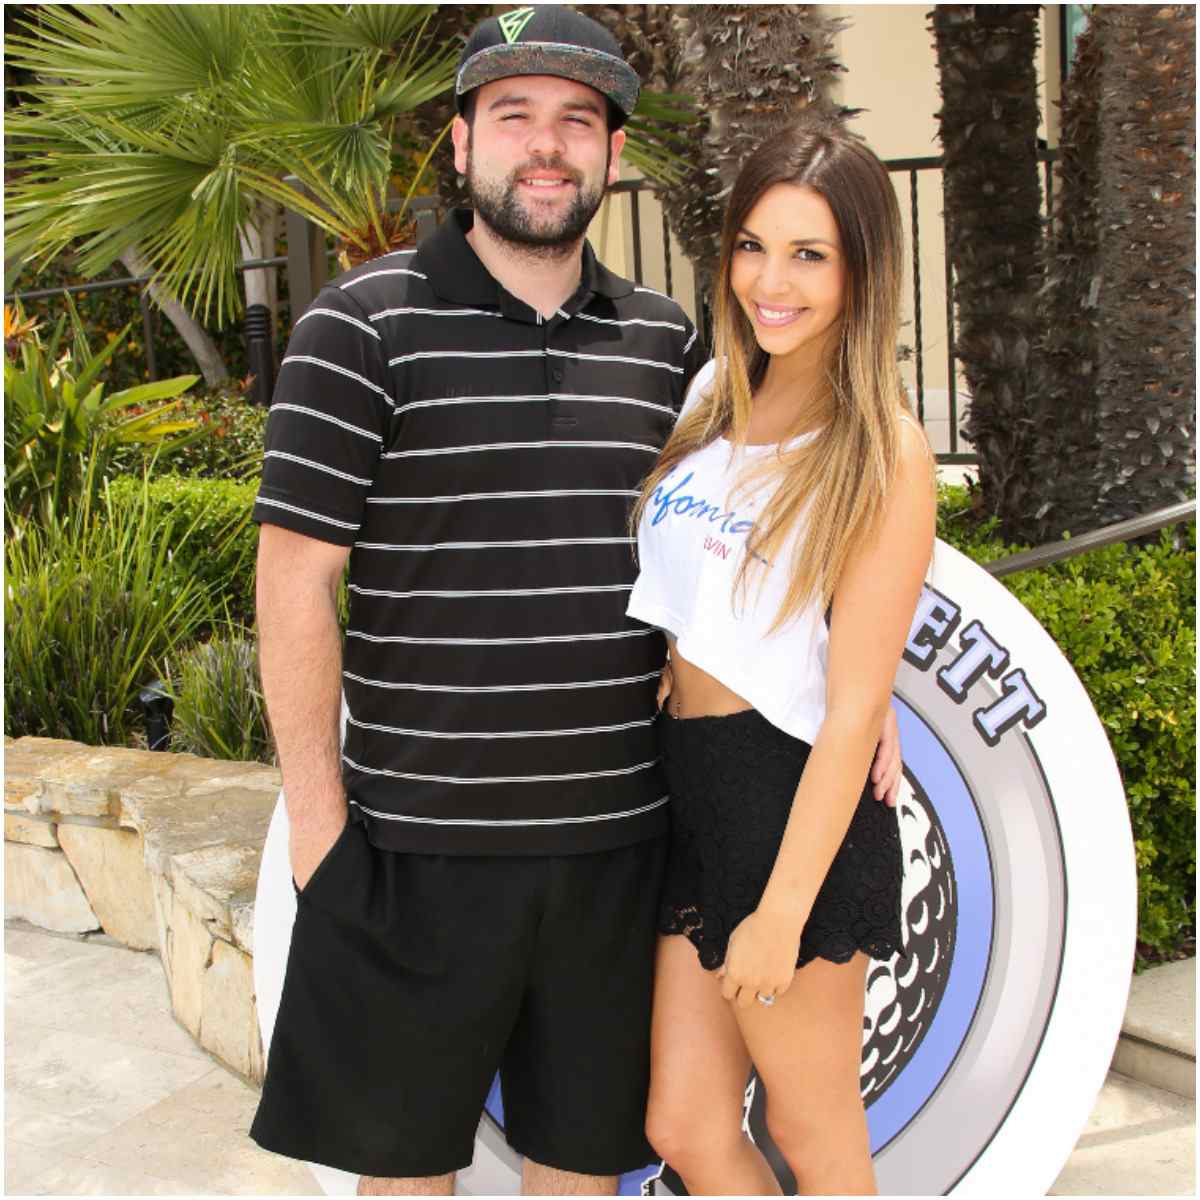 Michael Shay and his ex wife Scheana Marie